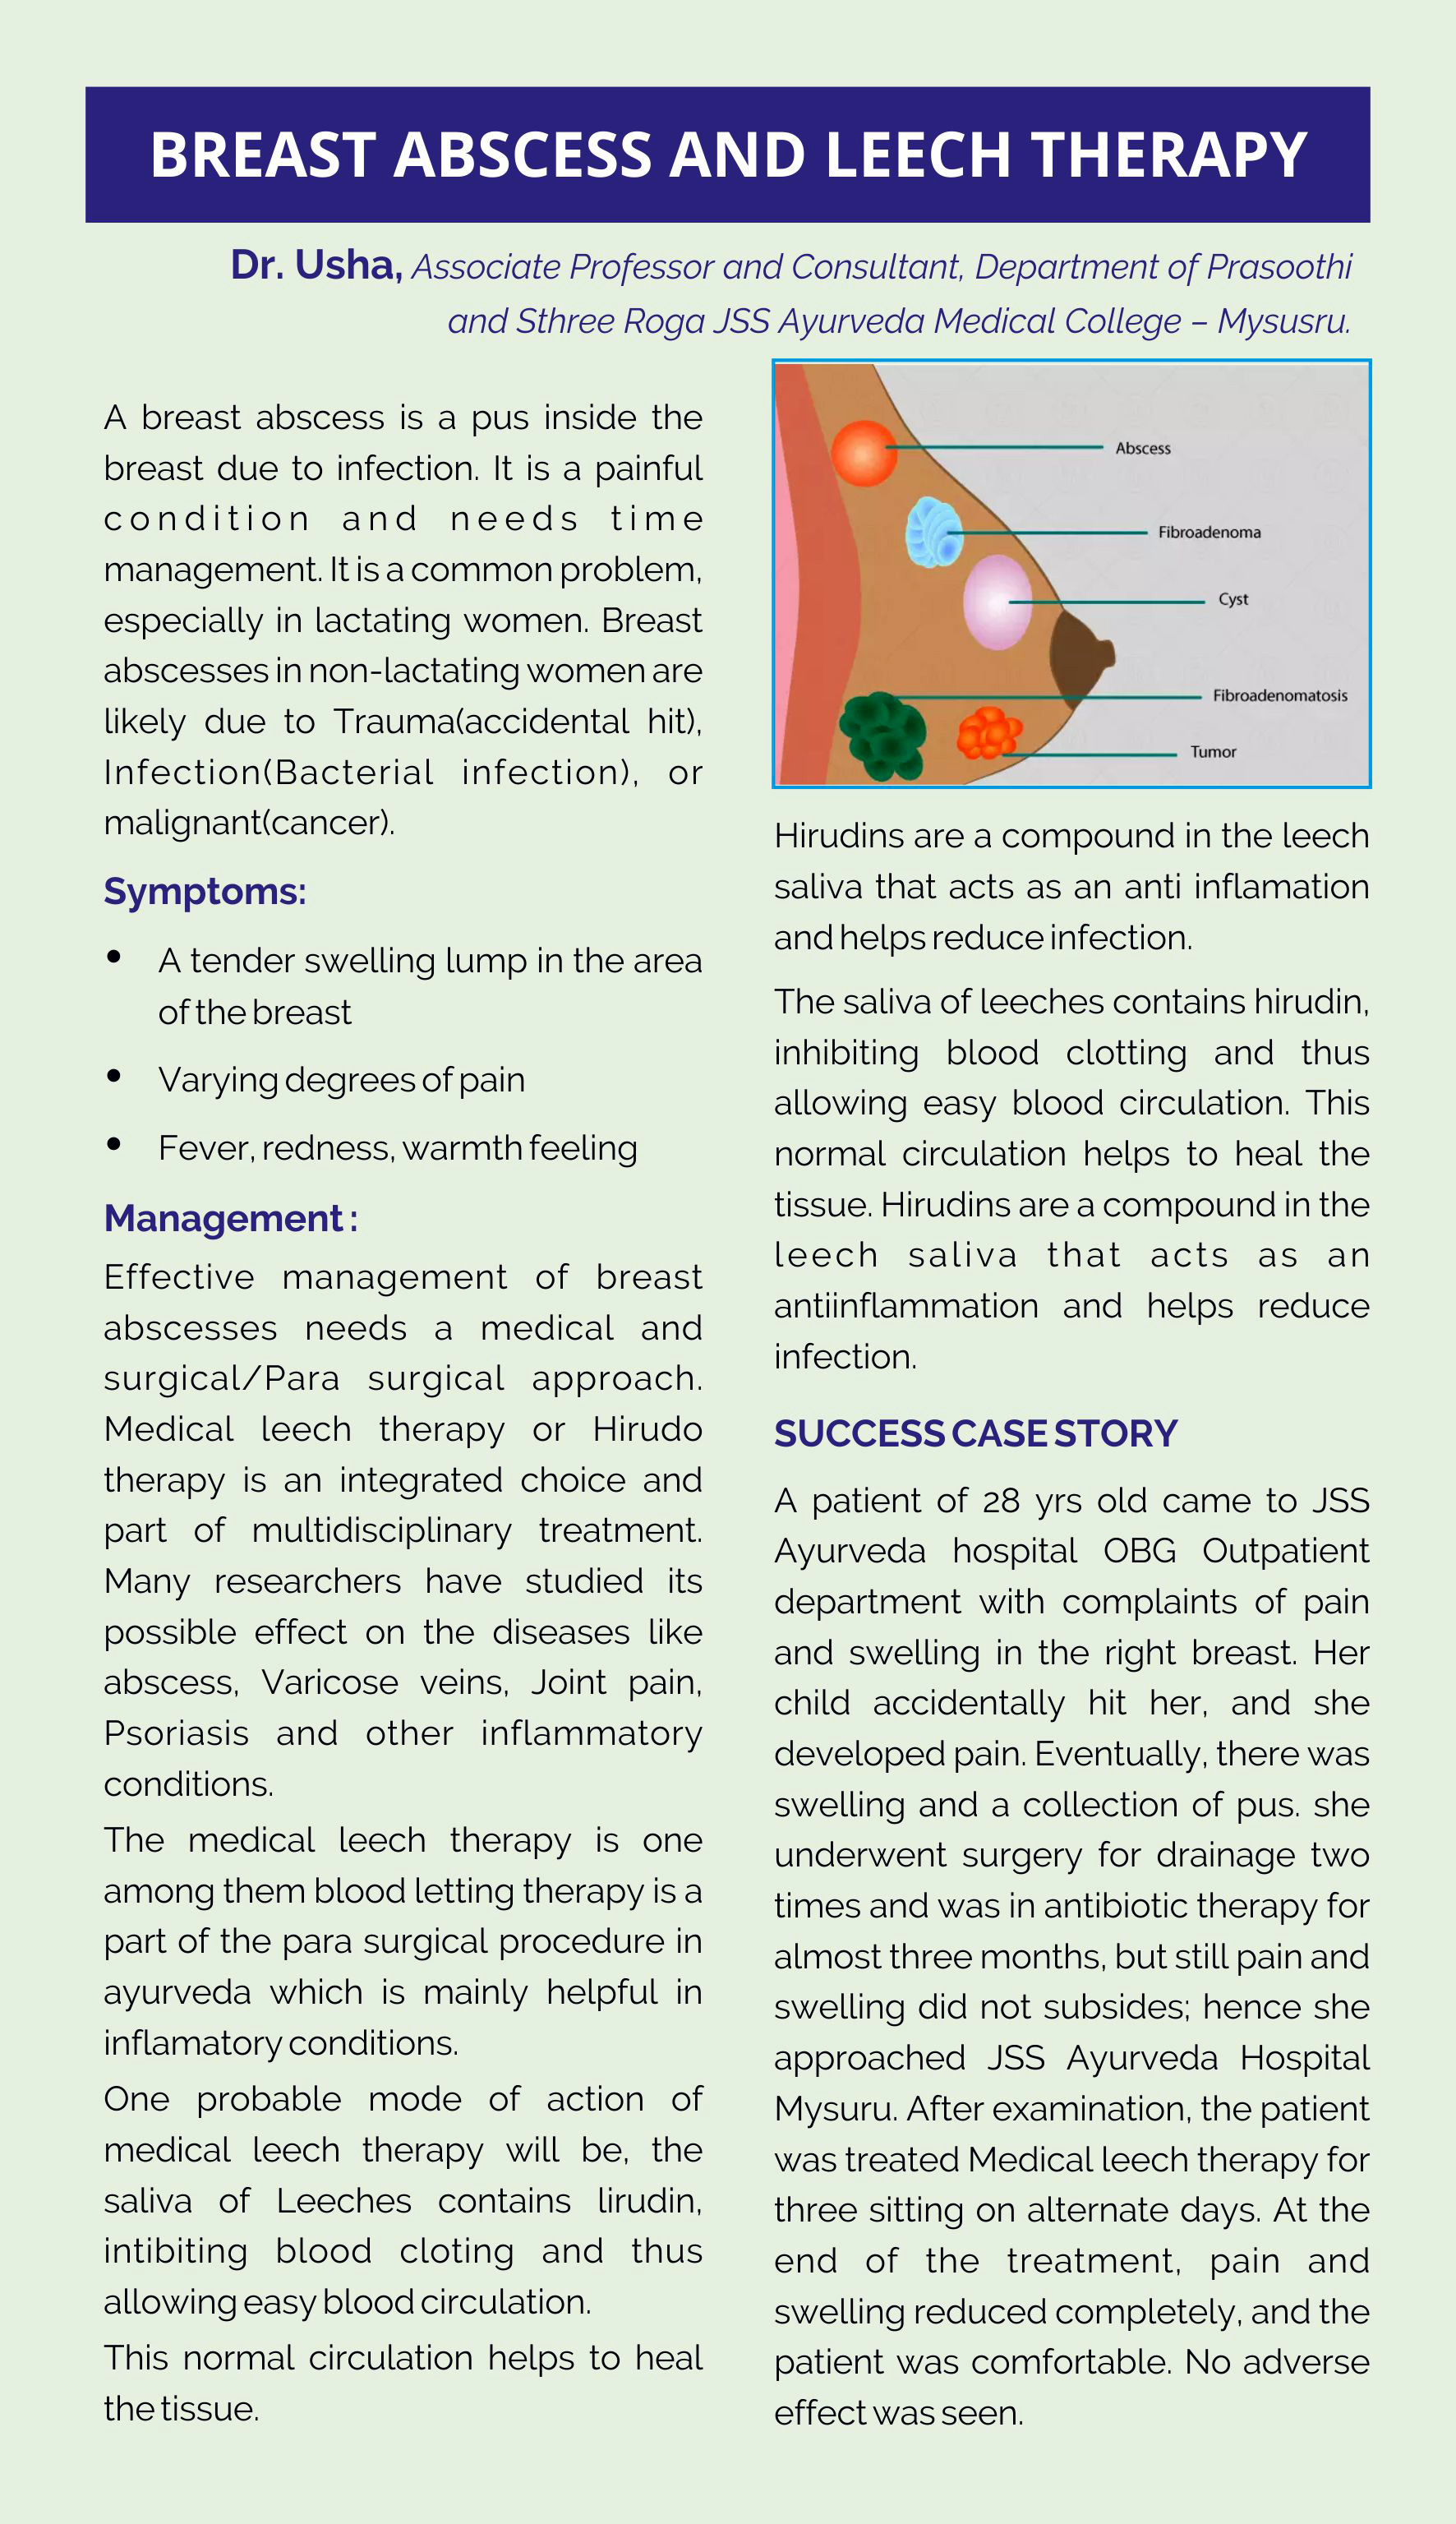 JSS Ayurveda Hospital - BREAST ABSCESS AND LEECH THERAPY